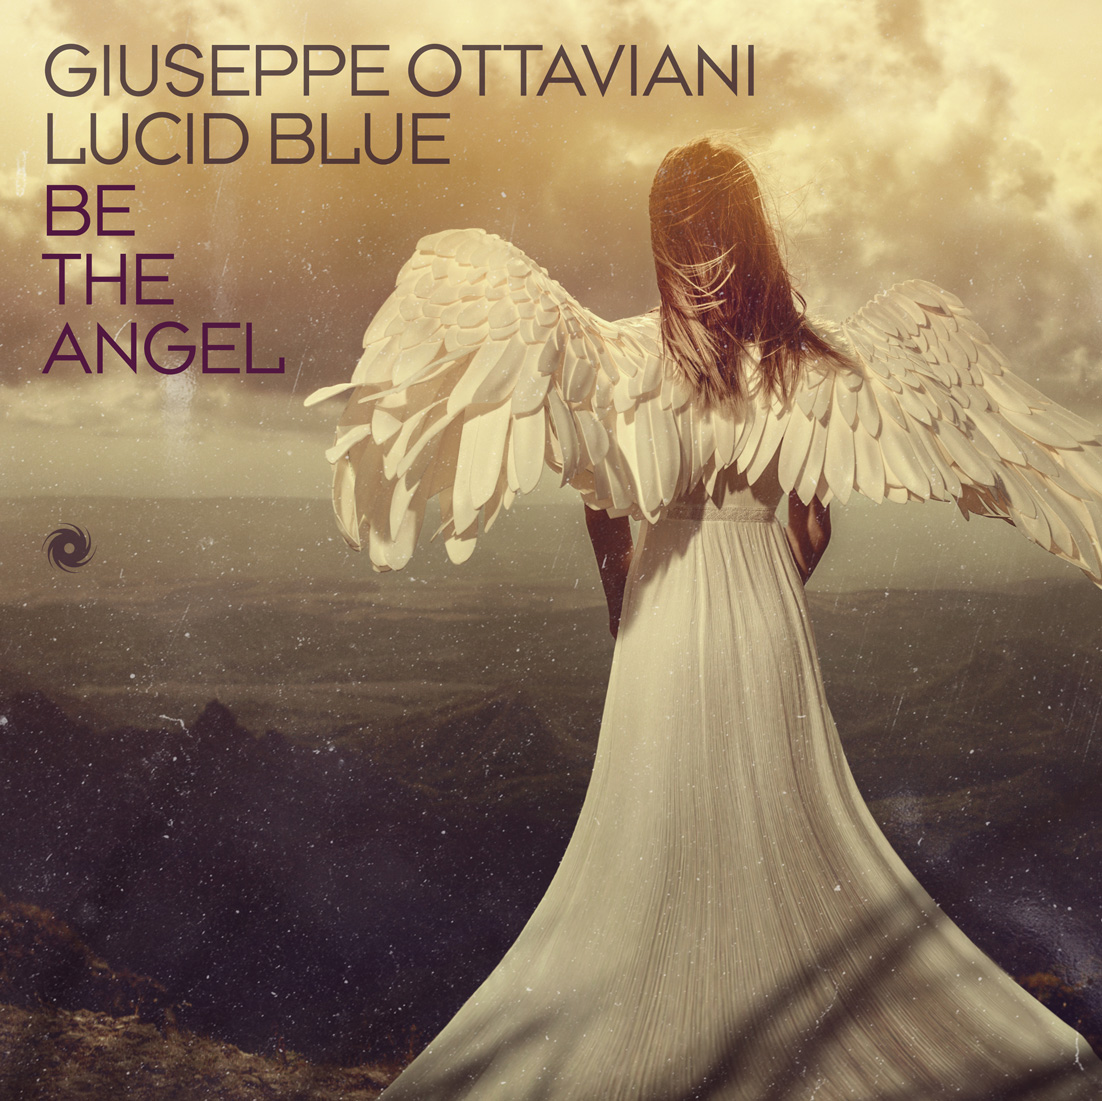 Giuseppe Ottaviani and Lucid Blue presents Be The Angel on Black Hole Recordings